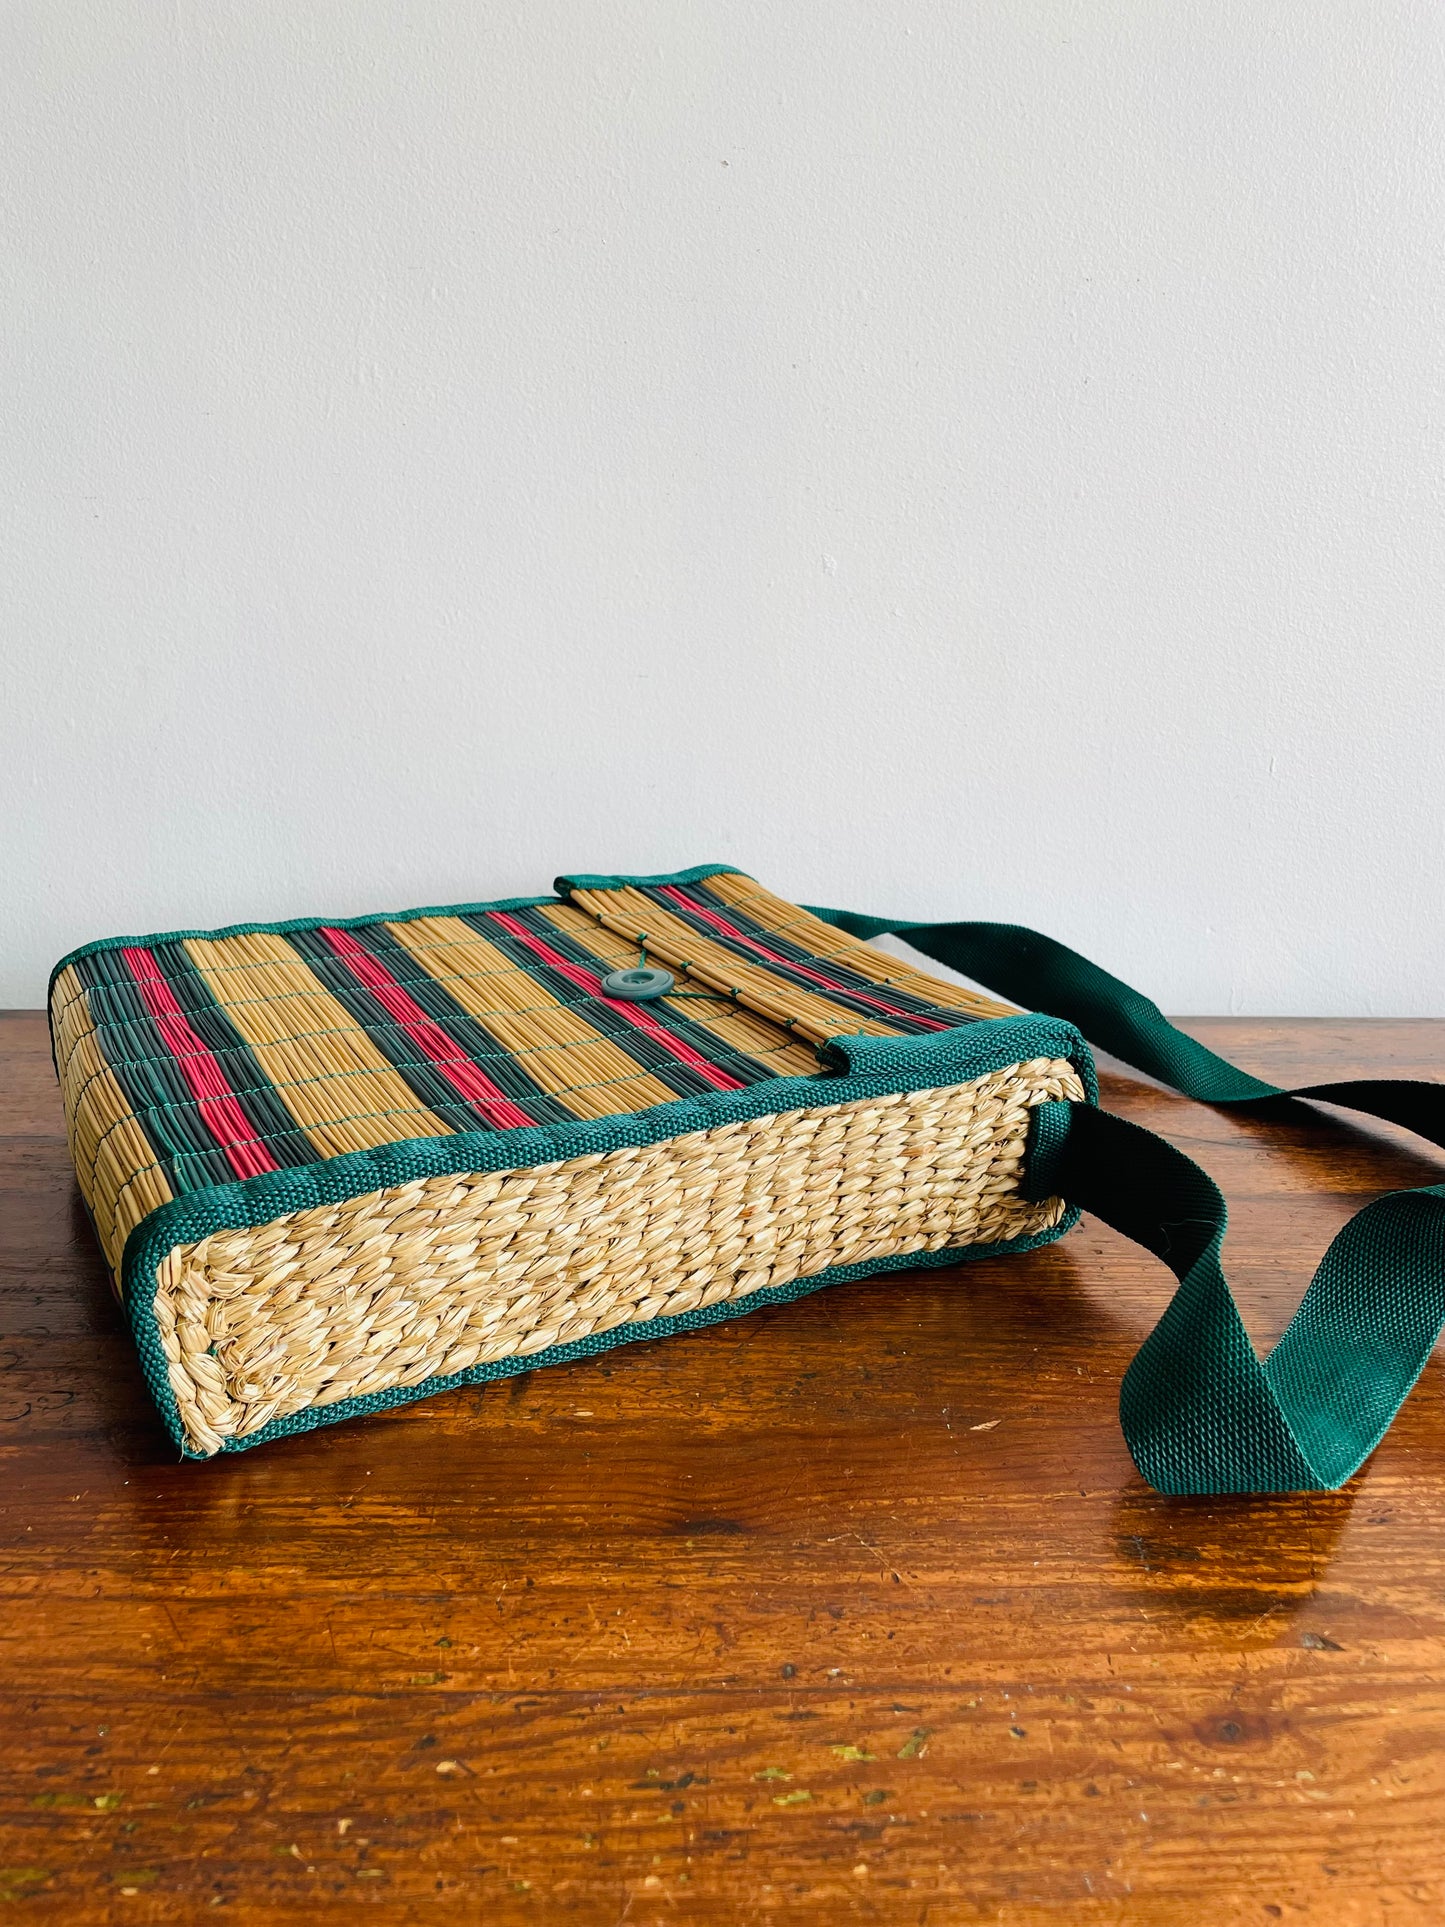 Woven Straw Wine Bottle Compartment Purse - Great for Picnics!